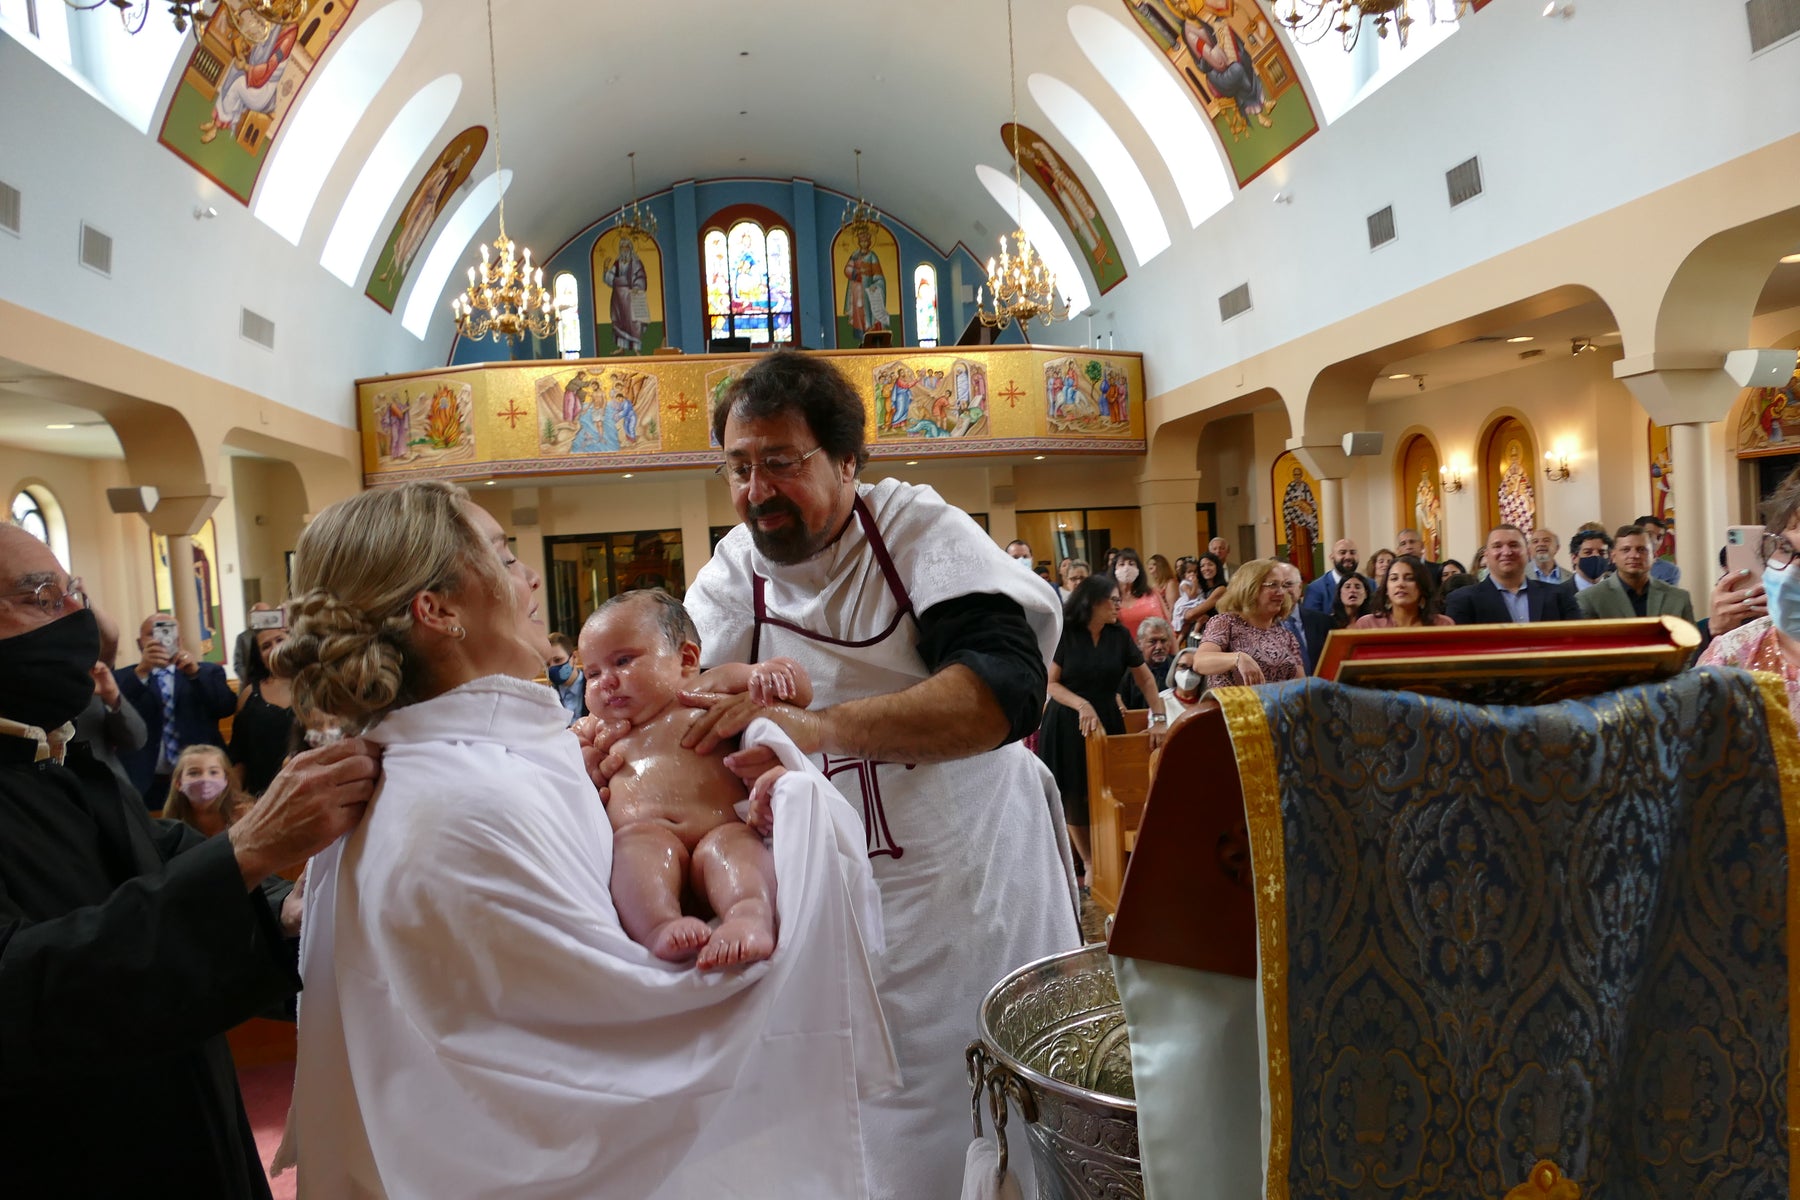 Baby being Baptized in Greek Orthodox Service.